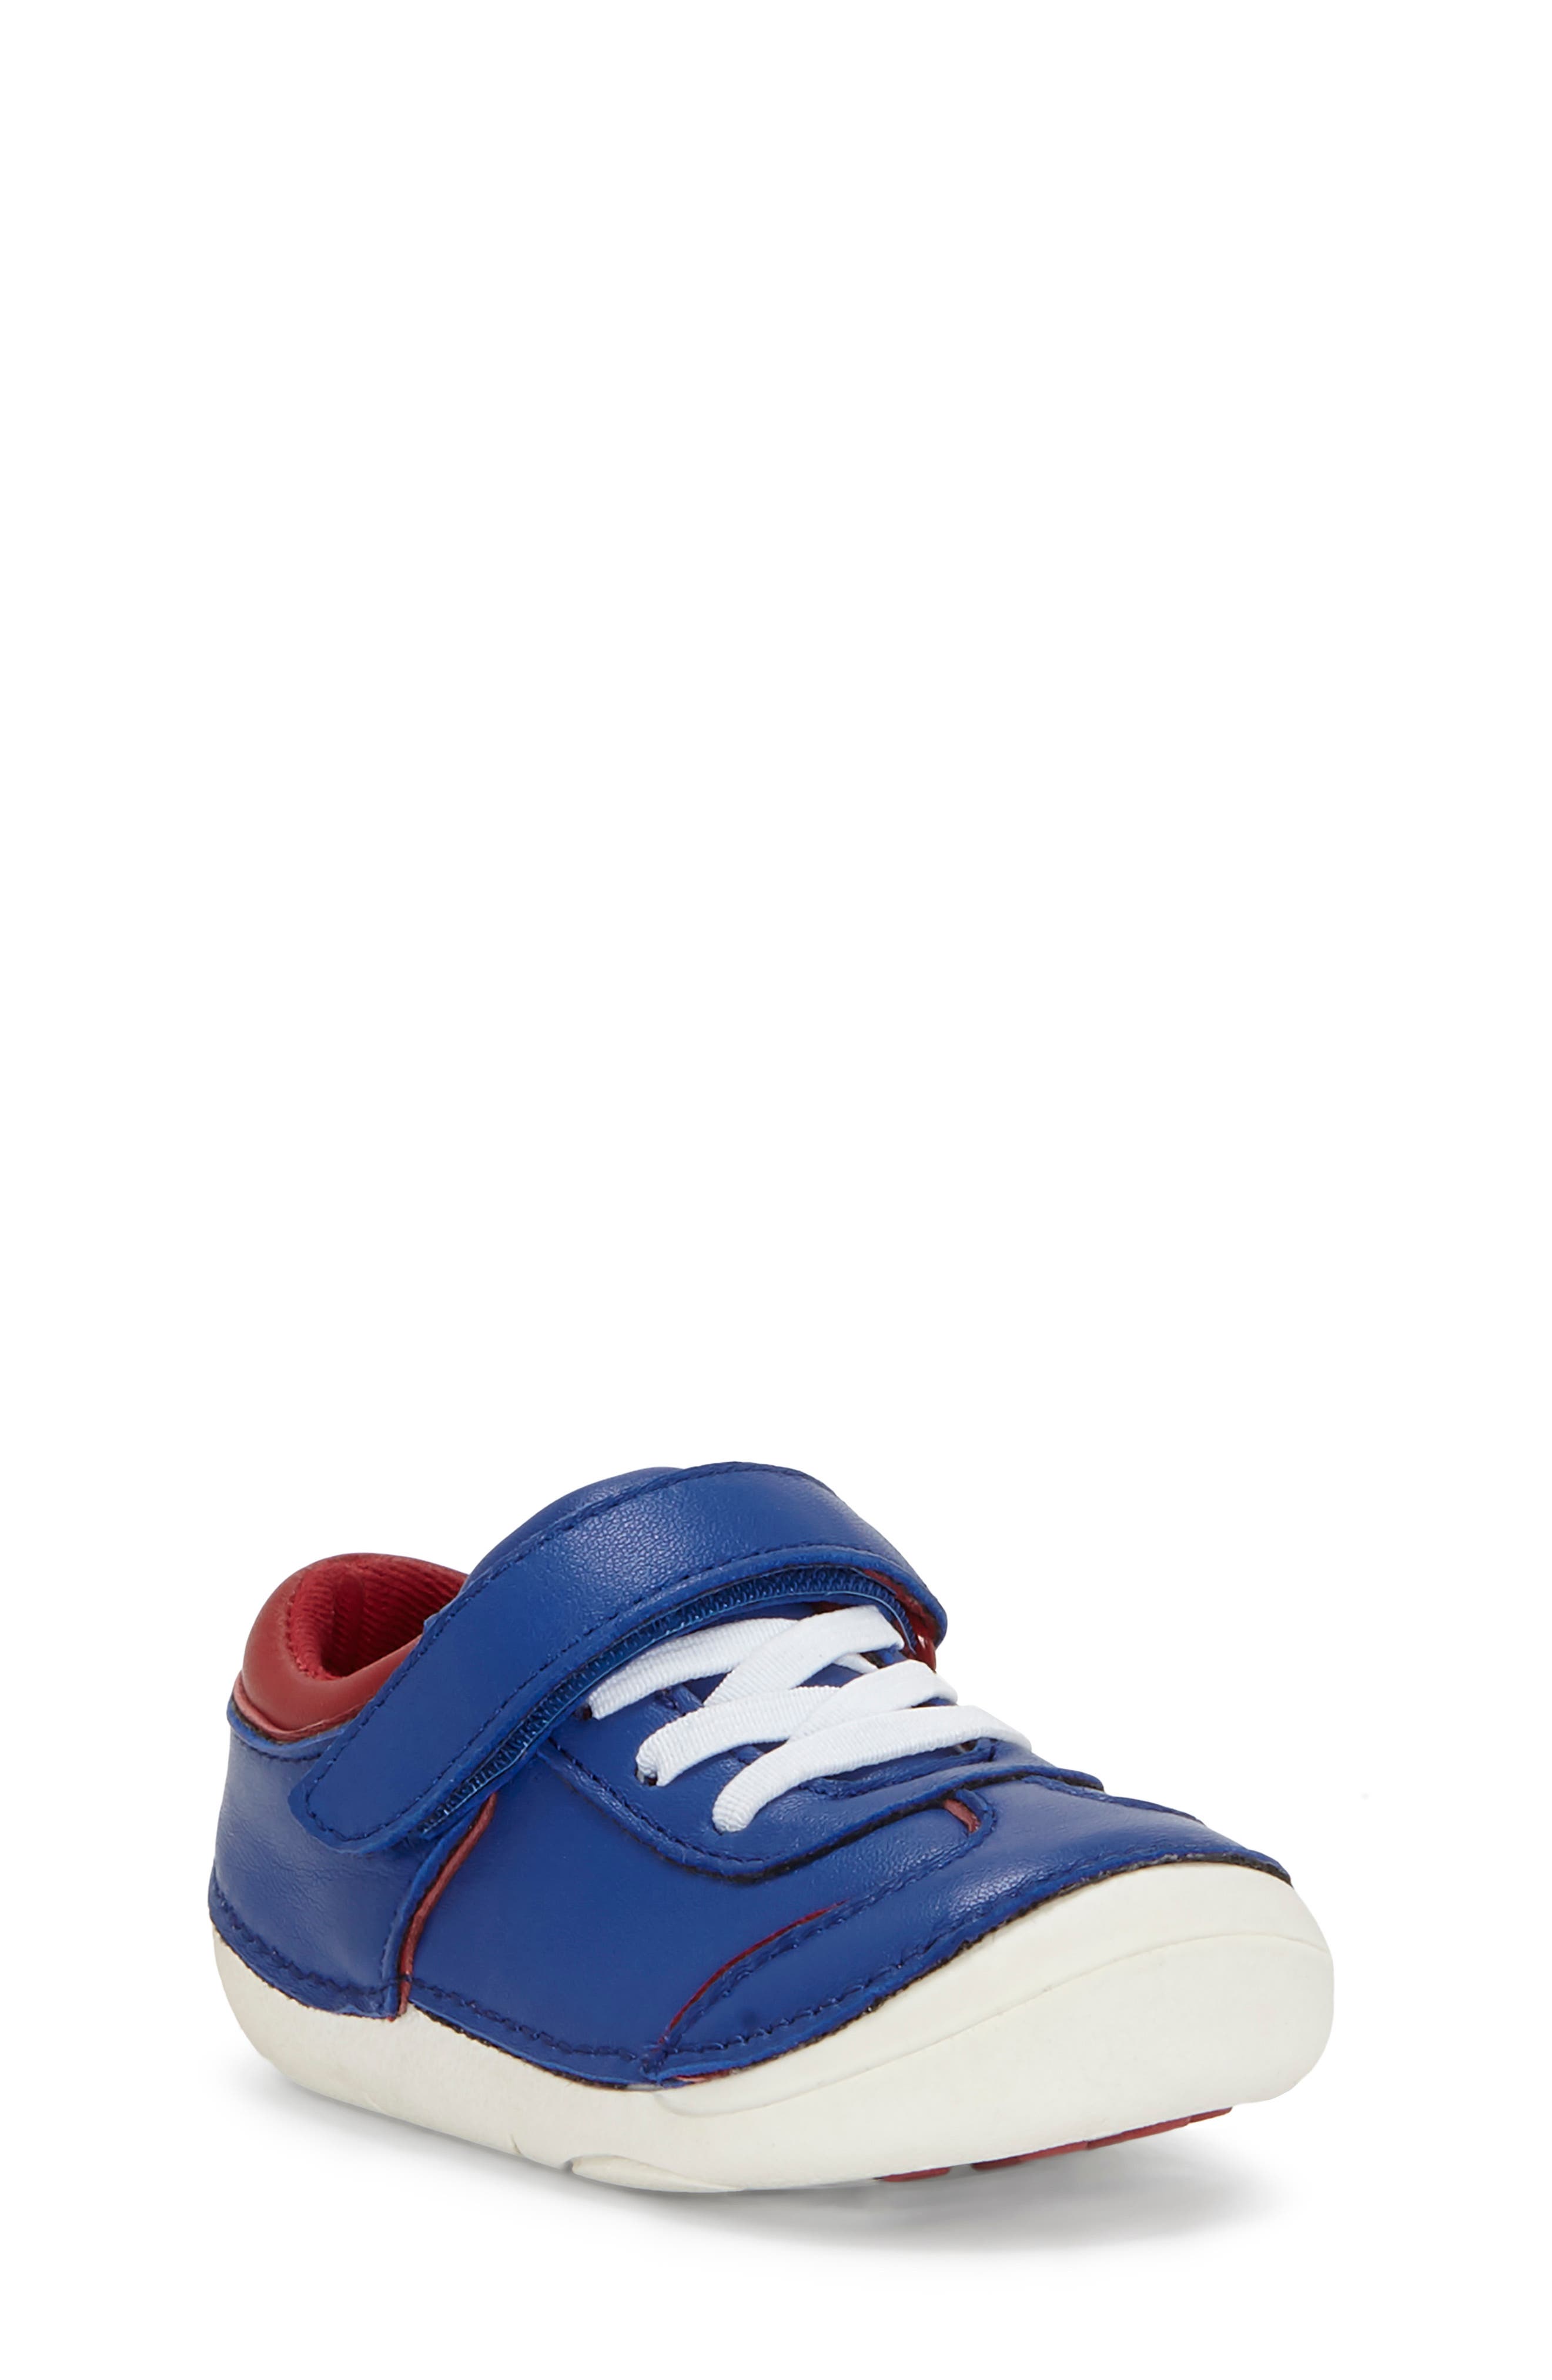 boys clearance sneakers